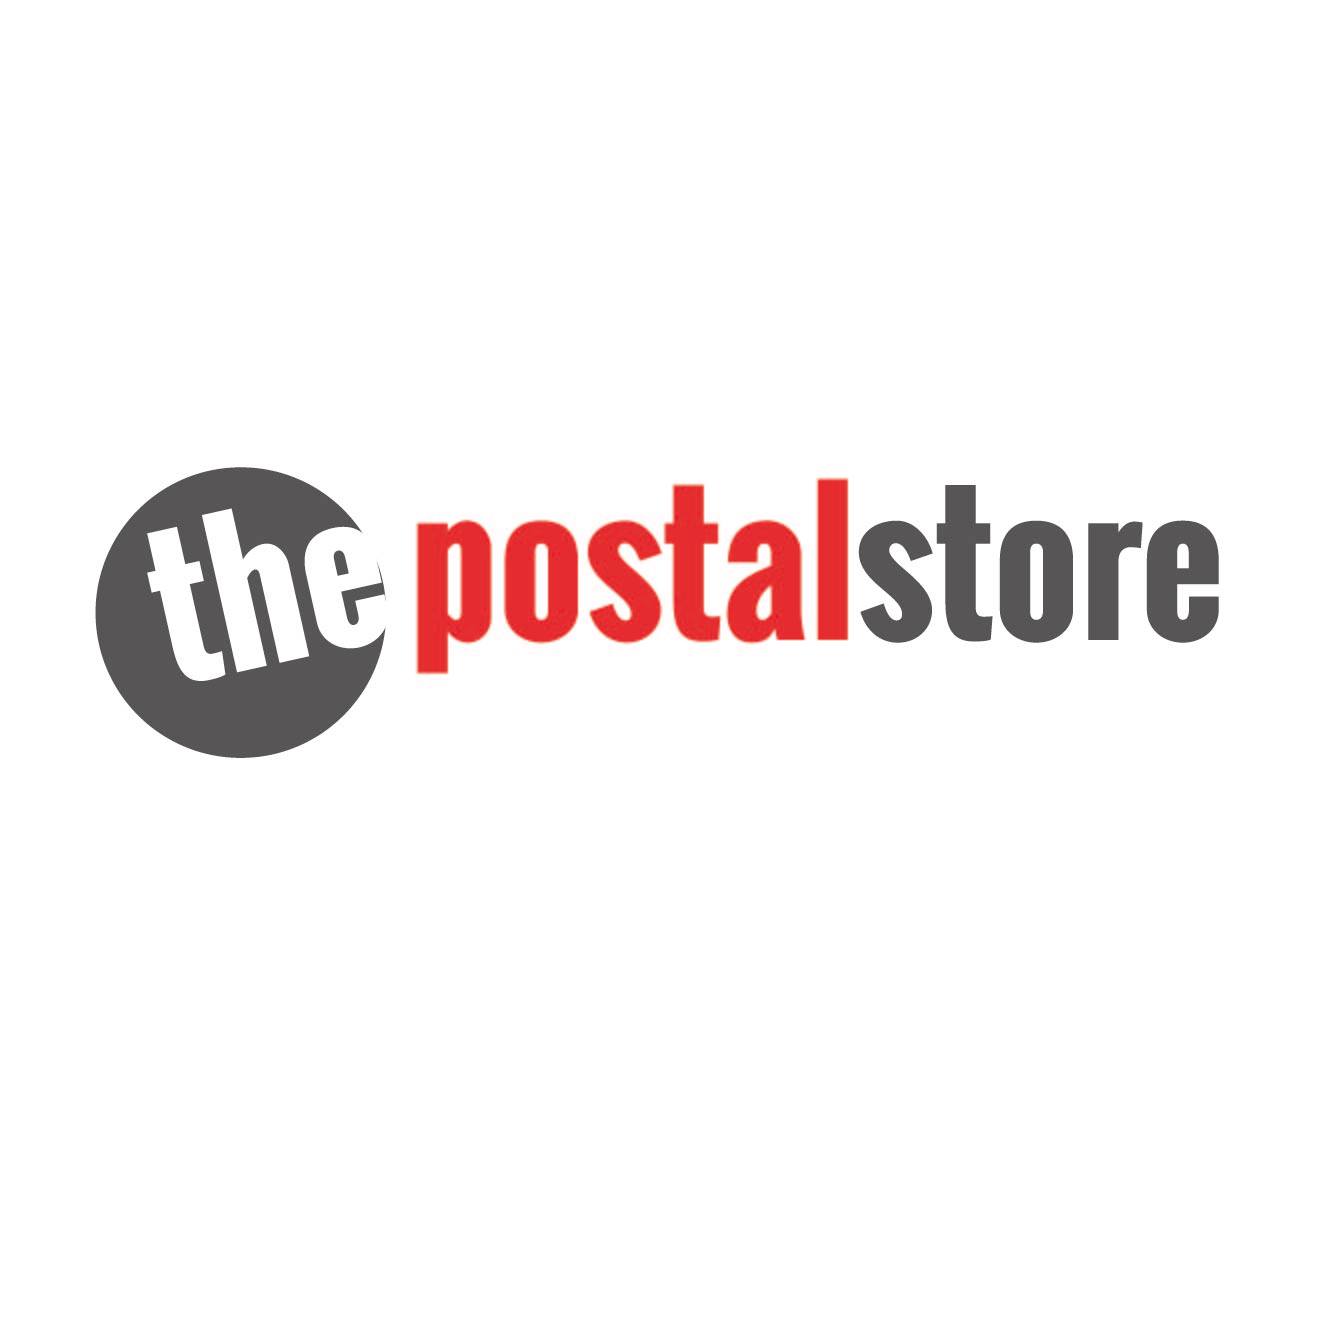 The Postal Store